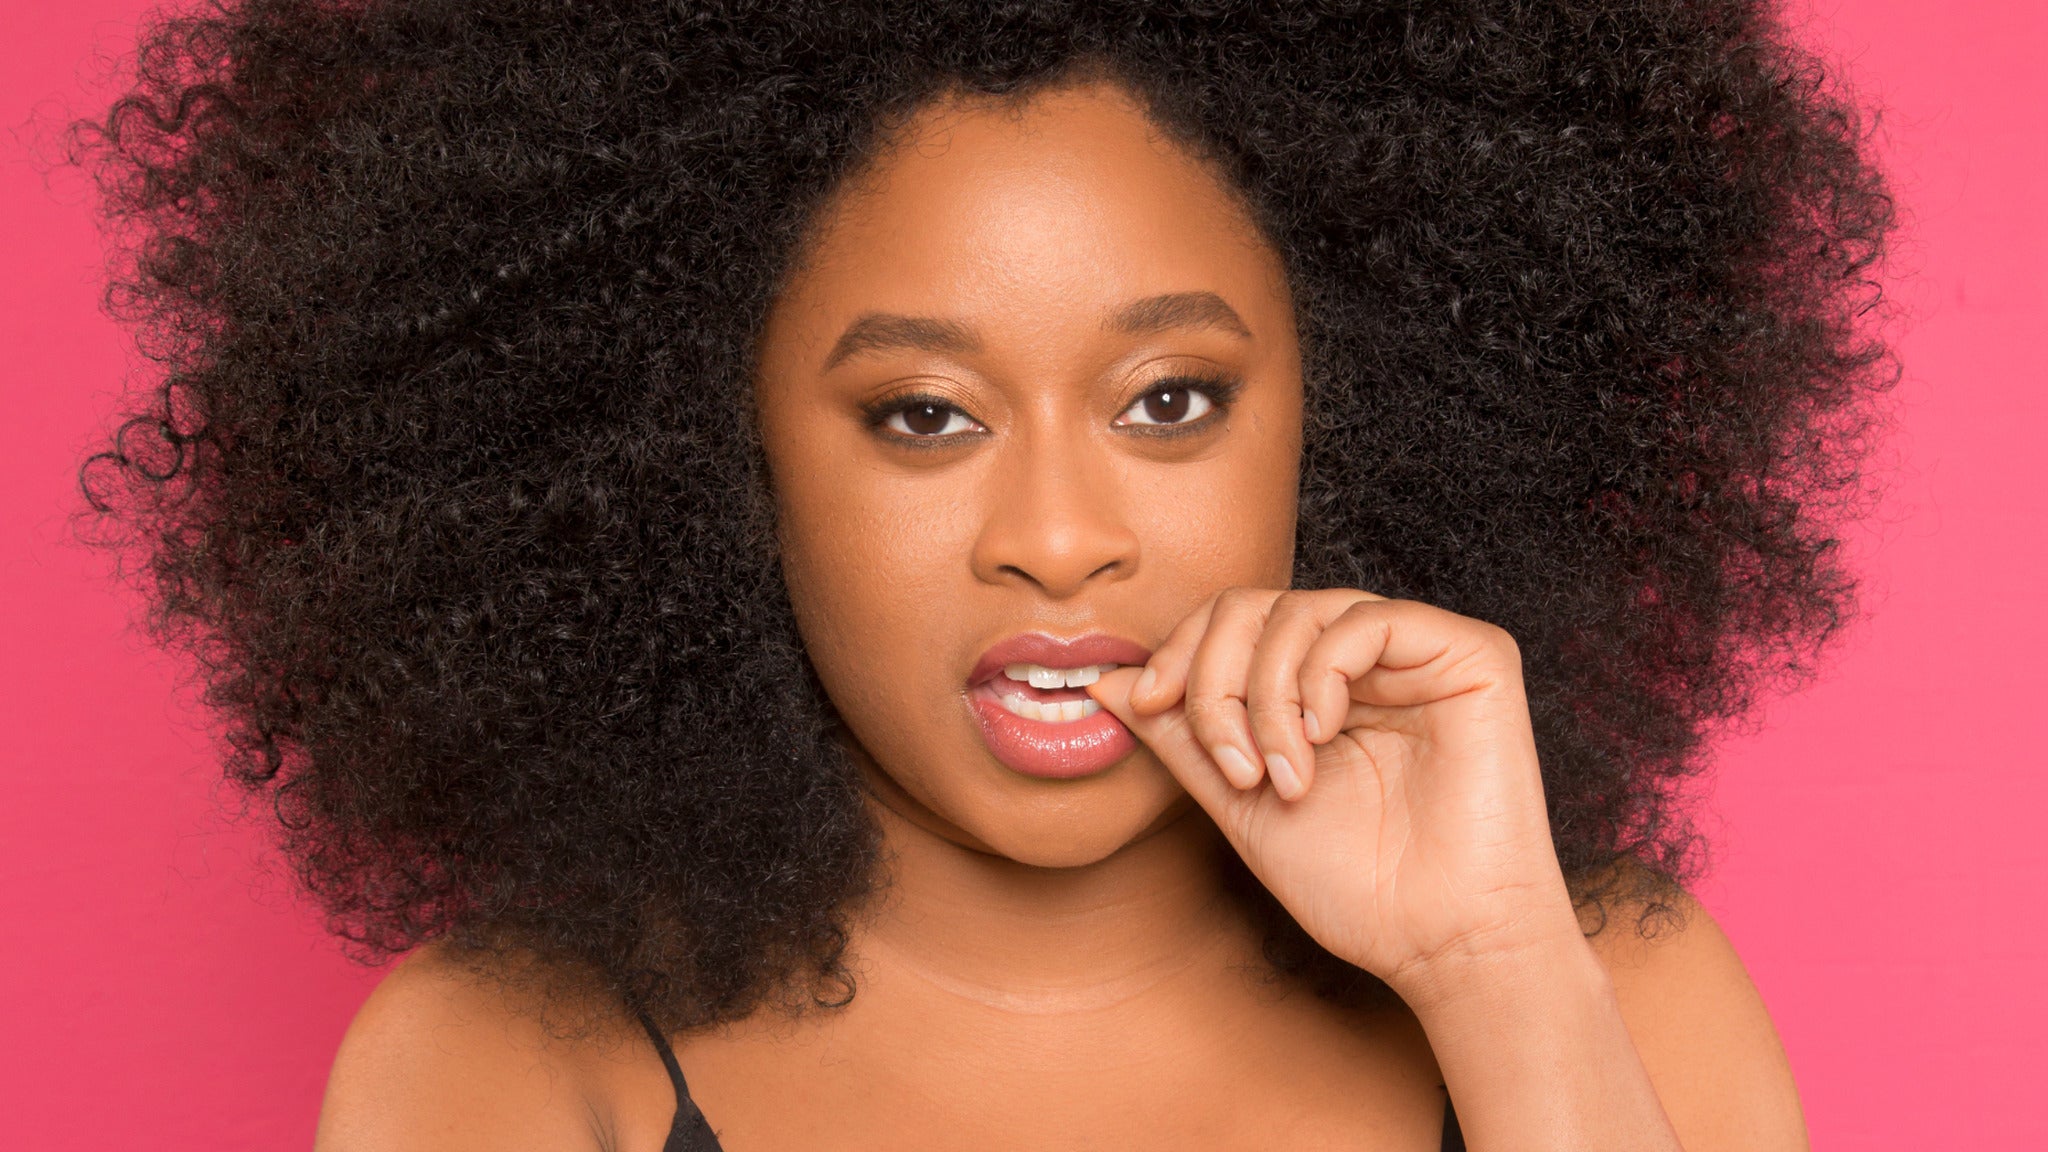 working presale password for Phoebe Robinson face value tickets in San Francisco